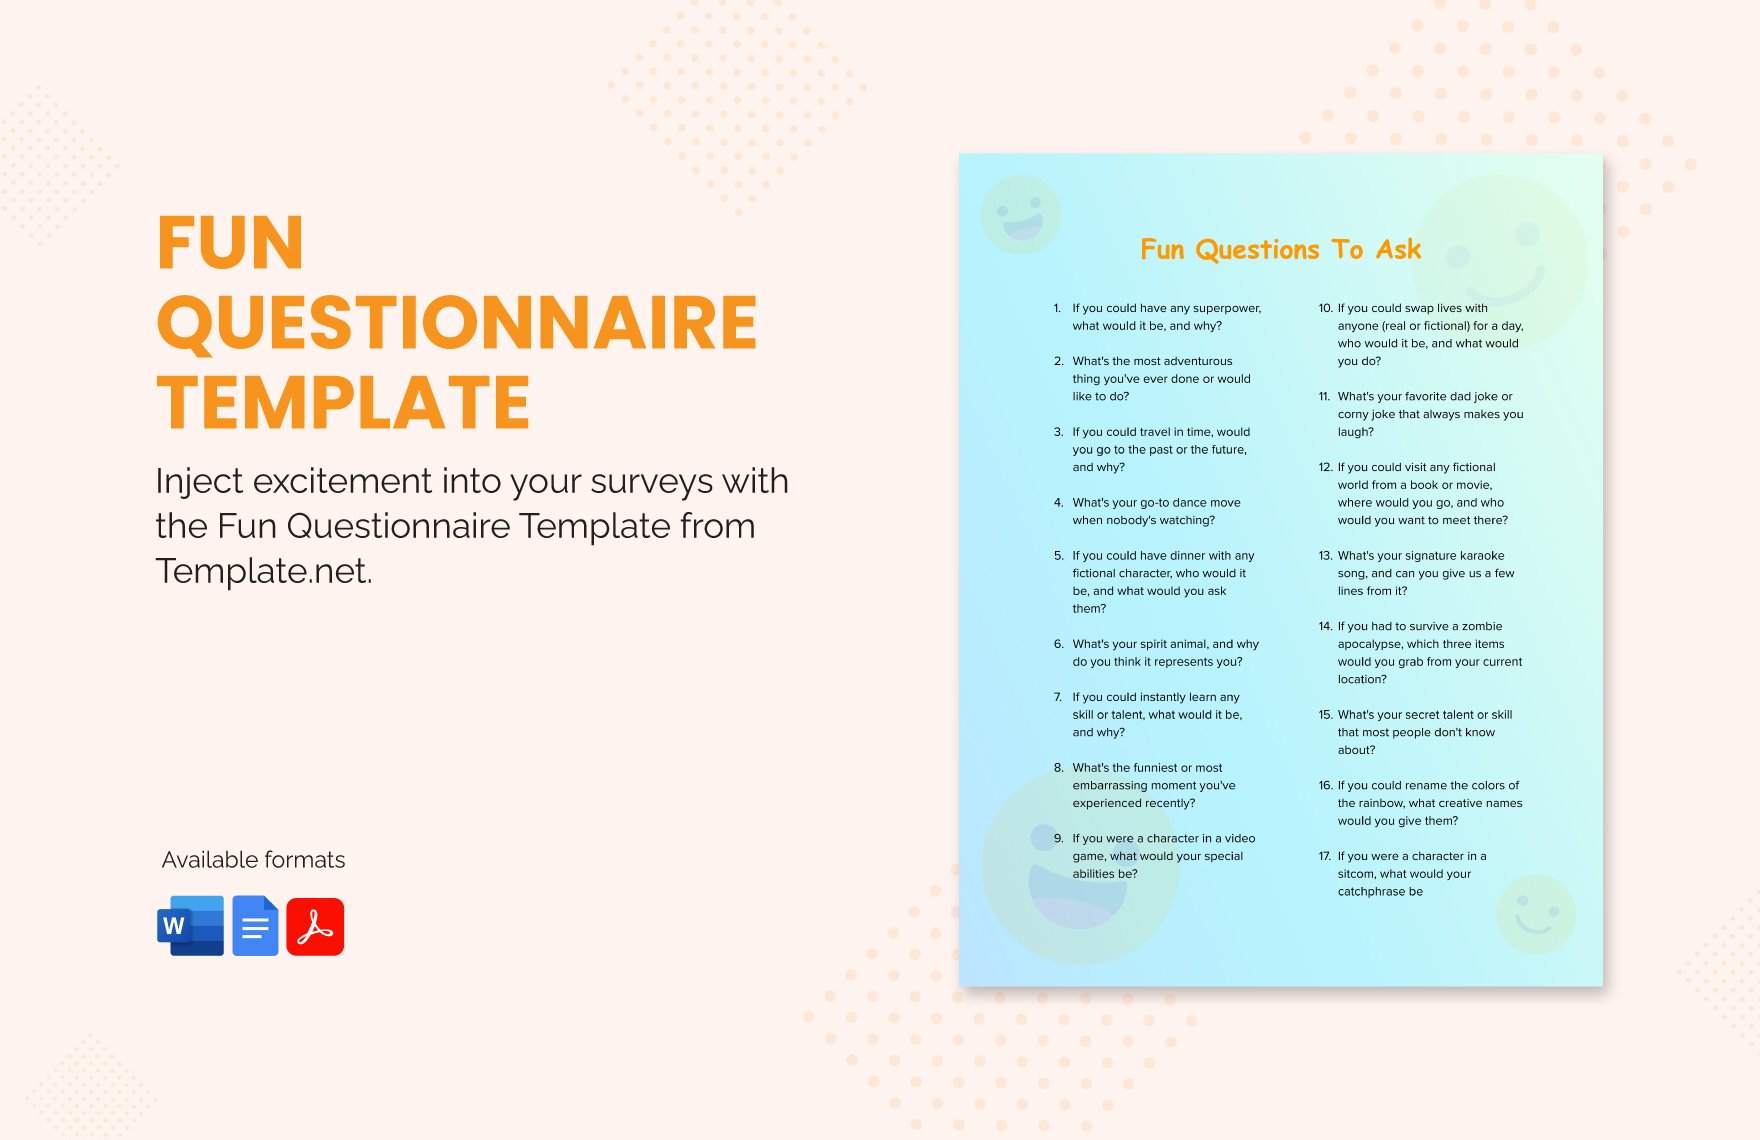 Free Fun Questionnaire Template in Word, Google Docs, PDF